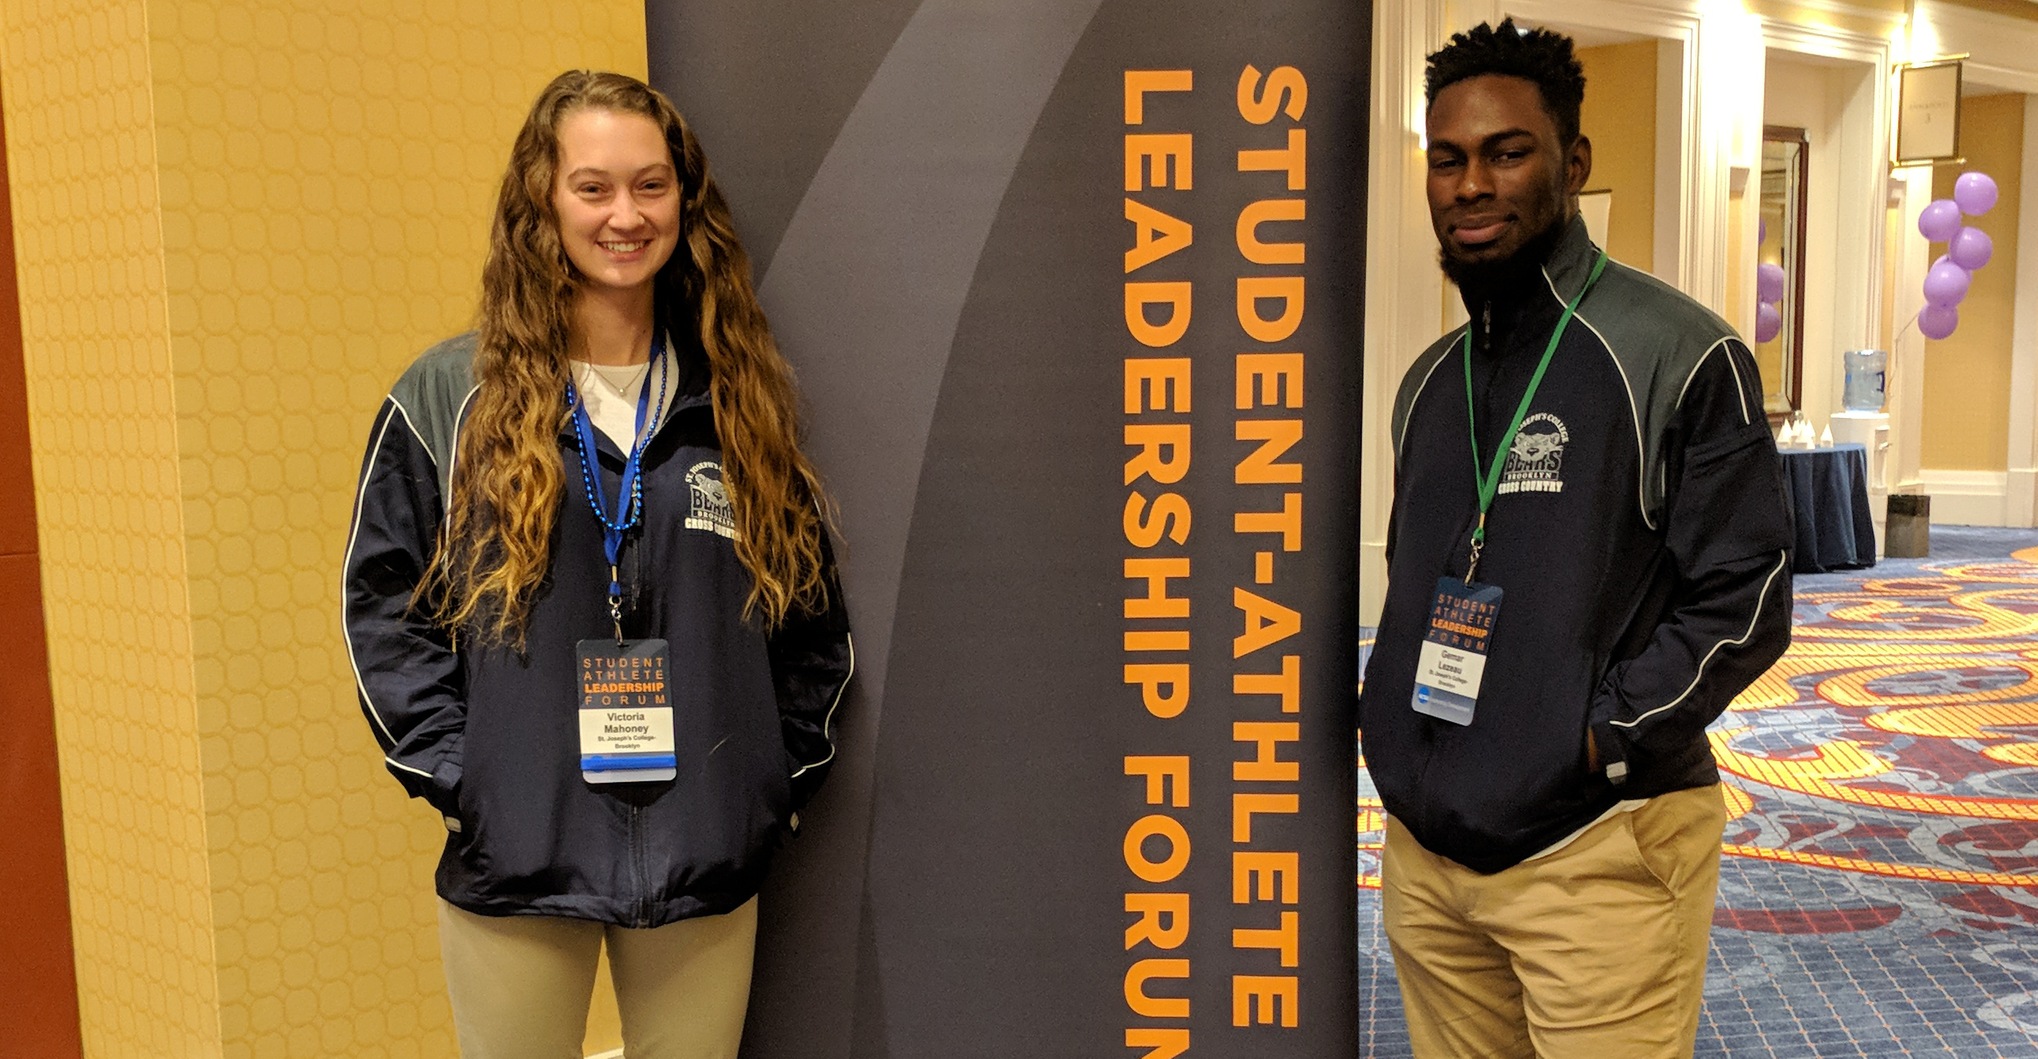 NCAA Student-Athlete Leadership Forum Provides Unforgettable Experience For Two SAAC Members